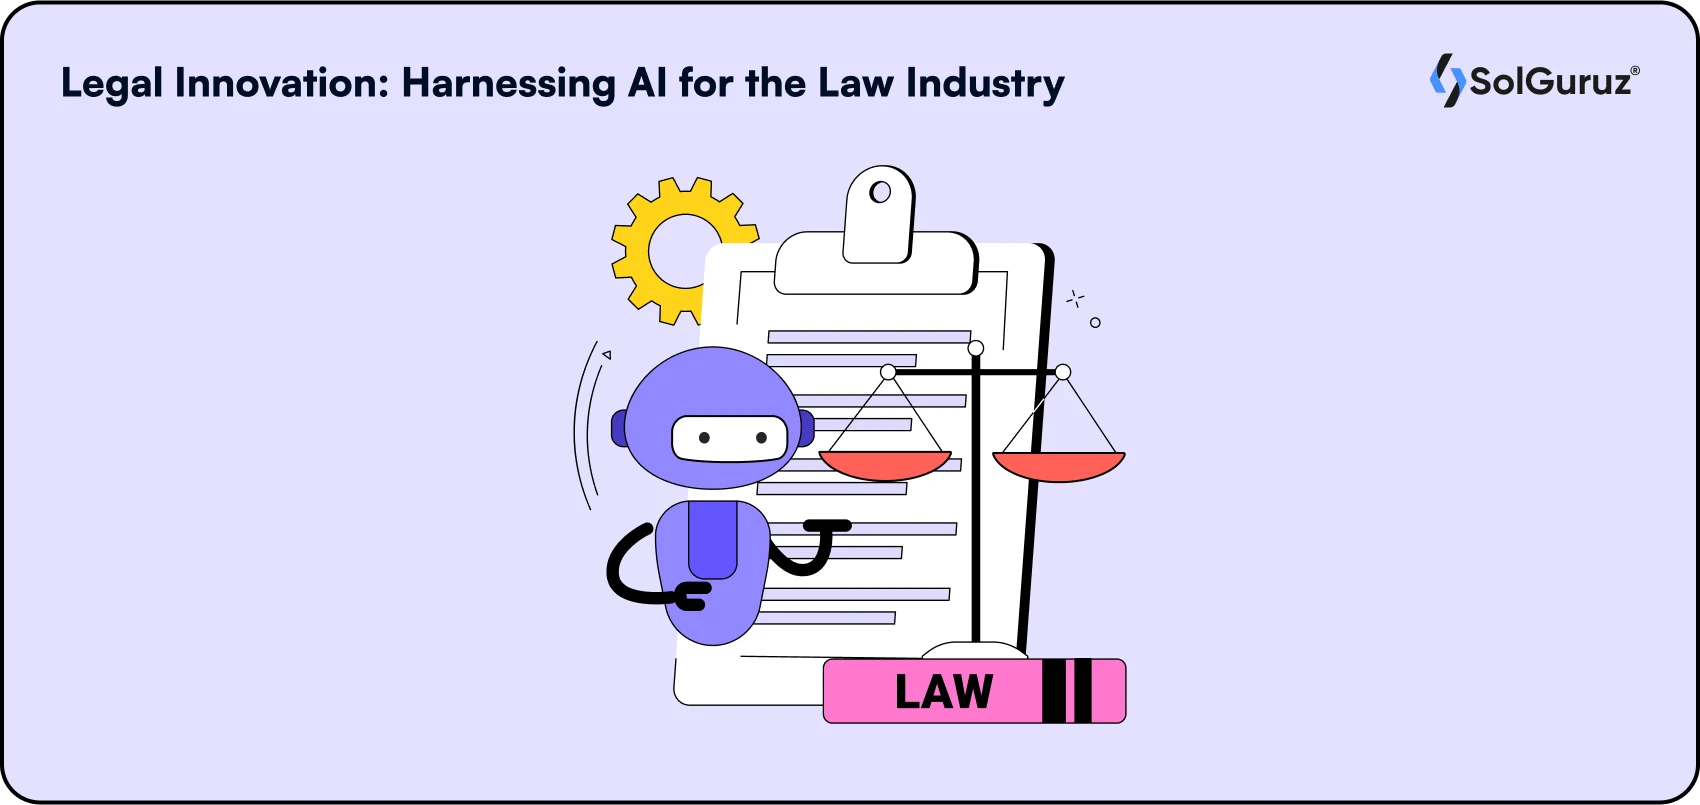 Legal Innovation: Harnessing AI for the Law Industry